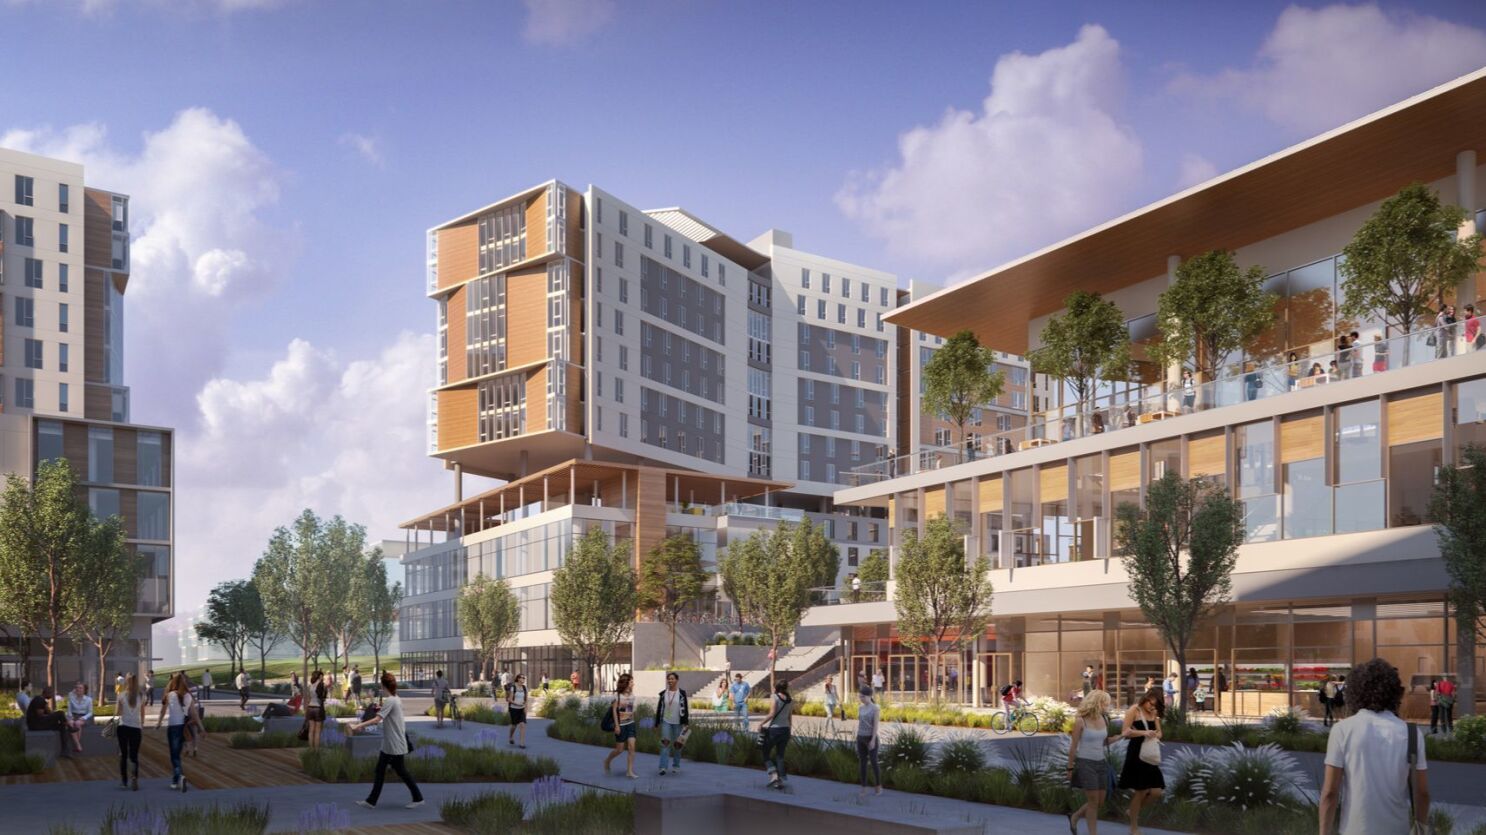 Uc San Diego Begins Building Largest Complex In Campus History The San Diego Union Tribune